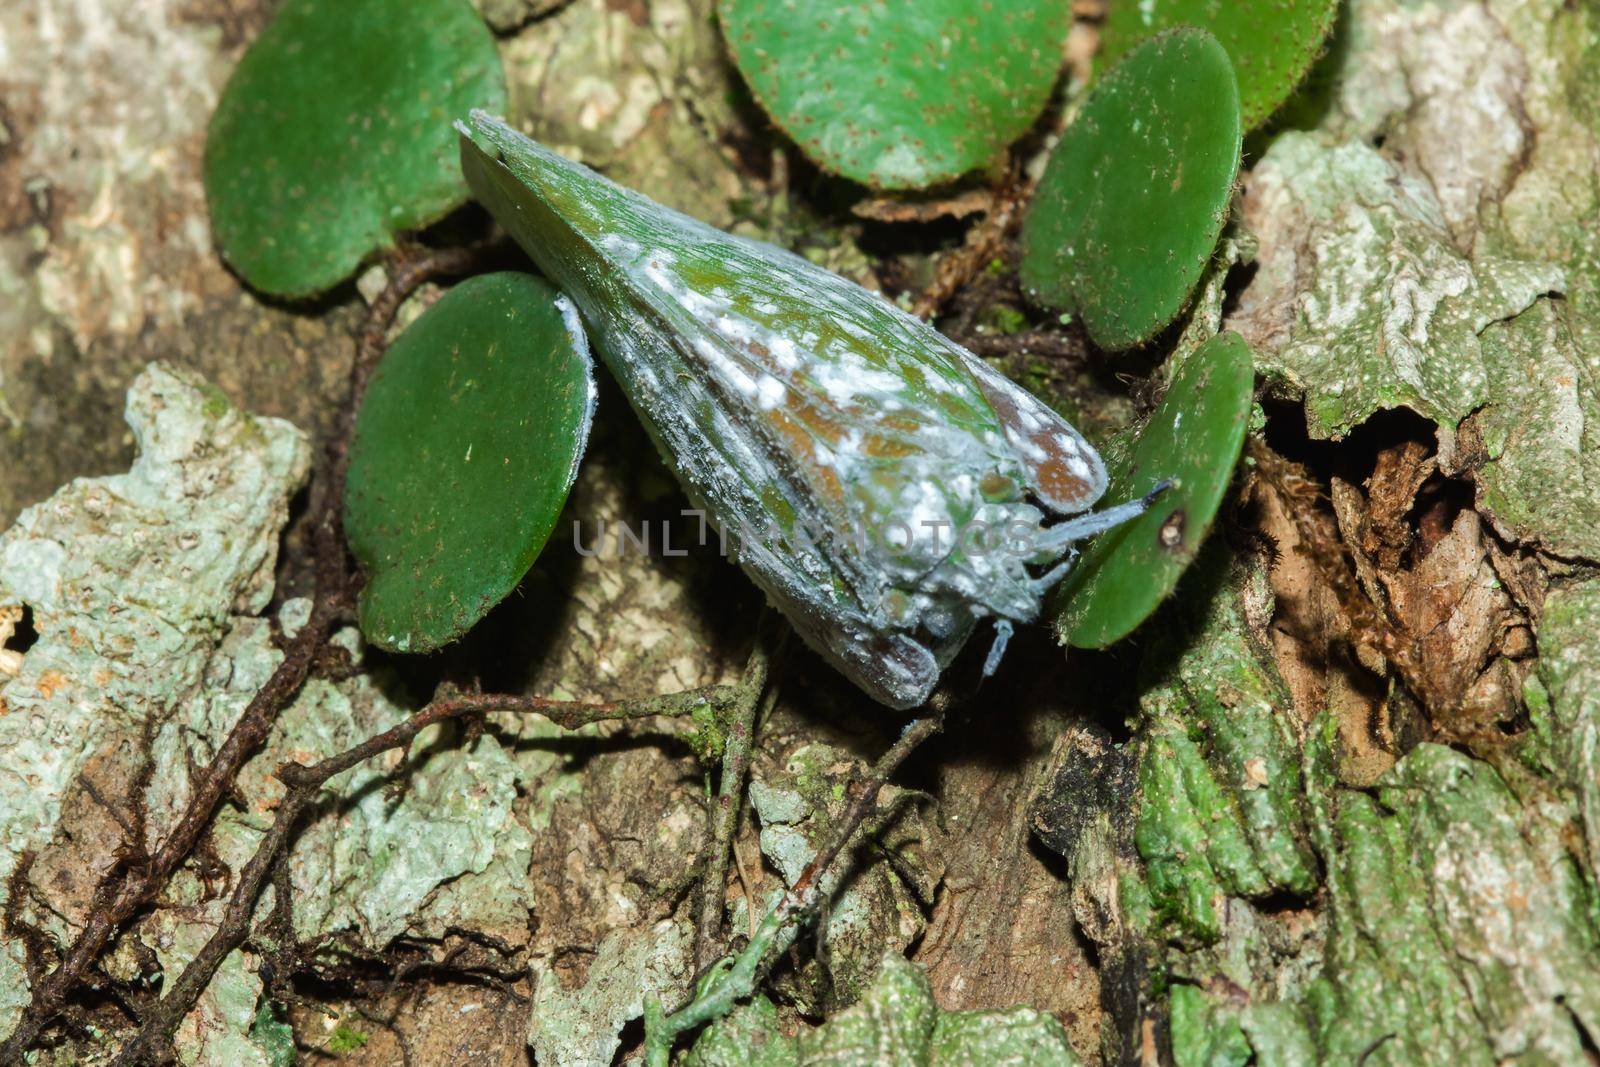 Flatid planthopper, or Moth bugs, wedge-shaped cicadas are small insects. An adult clings to a tree branch. The wings are opaque and are white.

  
